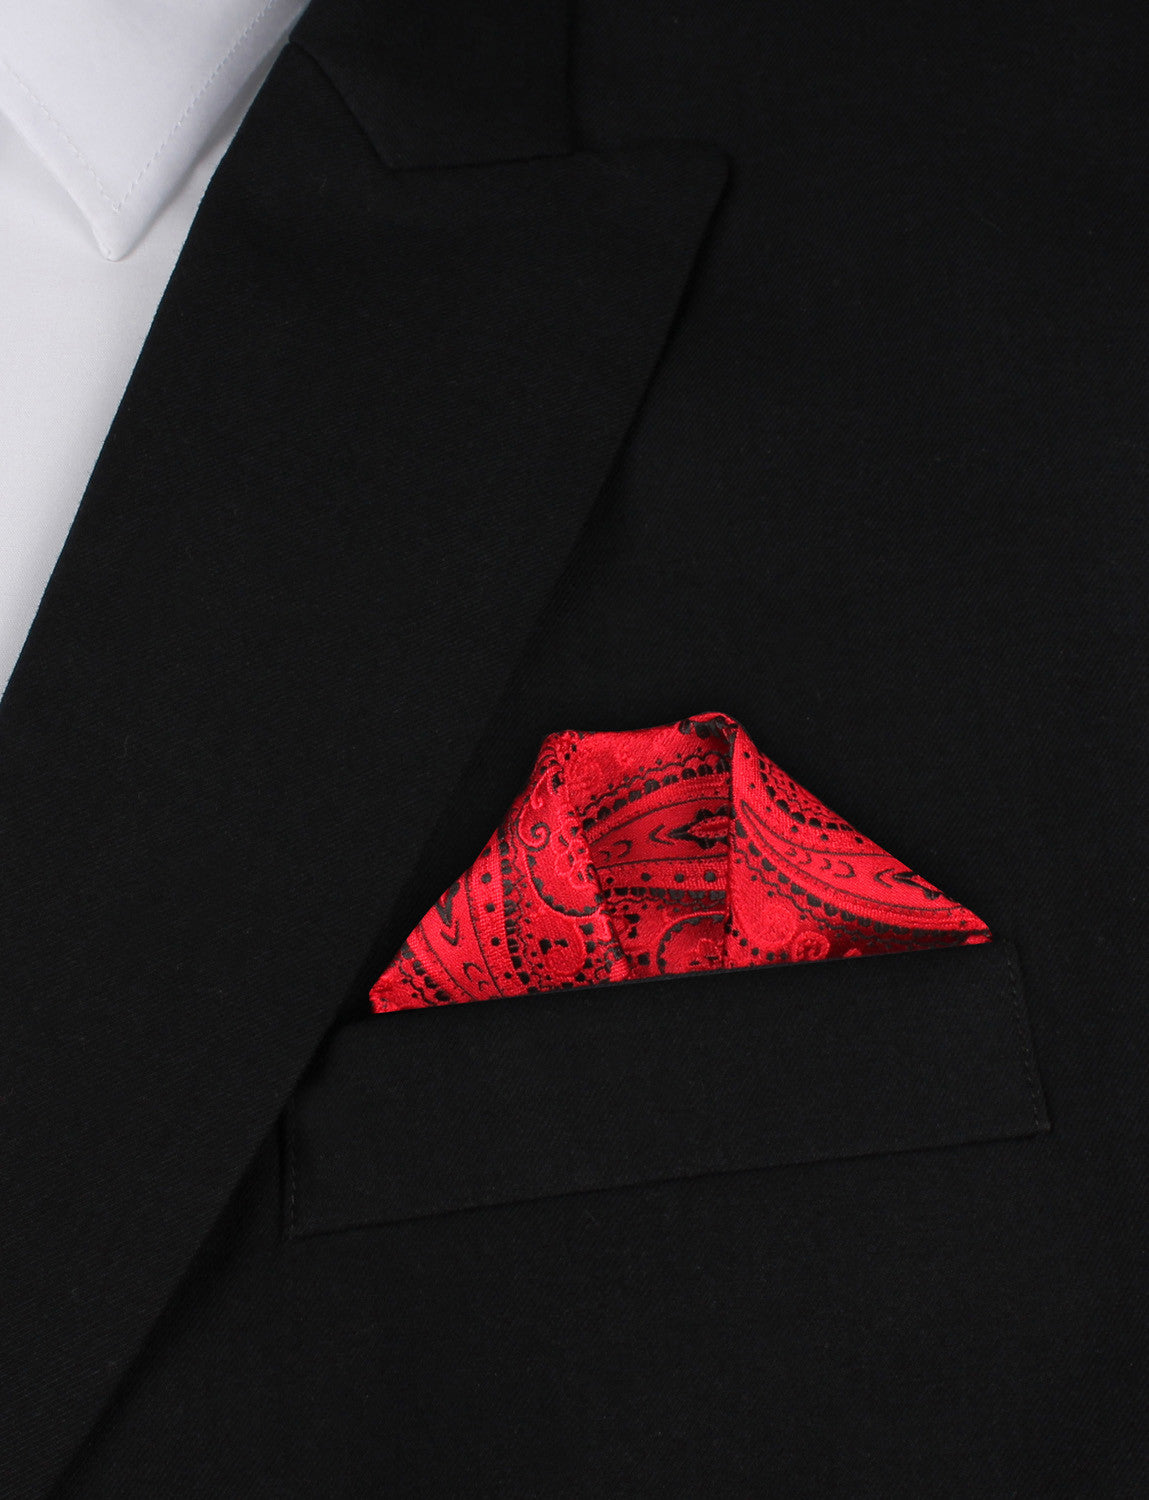 Paisley Red Maroon with Black - Winged Puff Pocket Square Fold